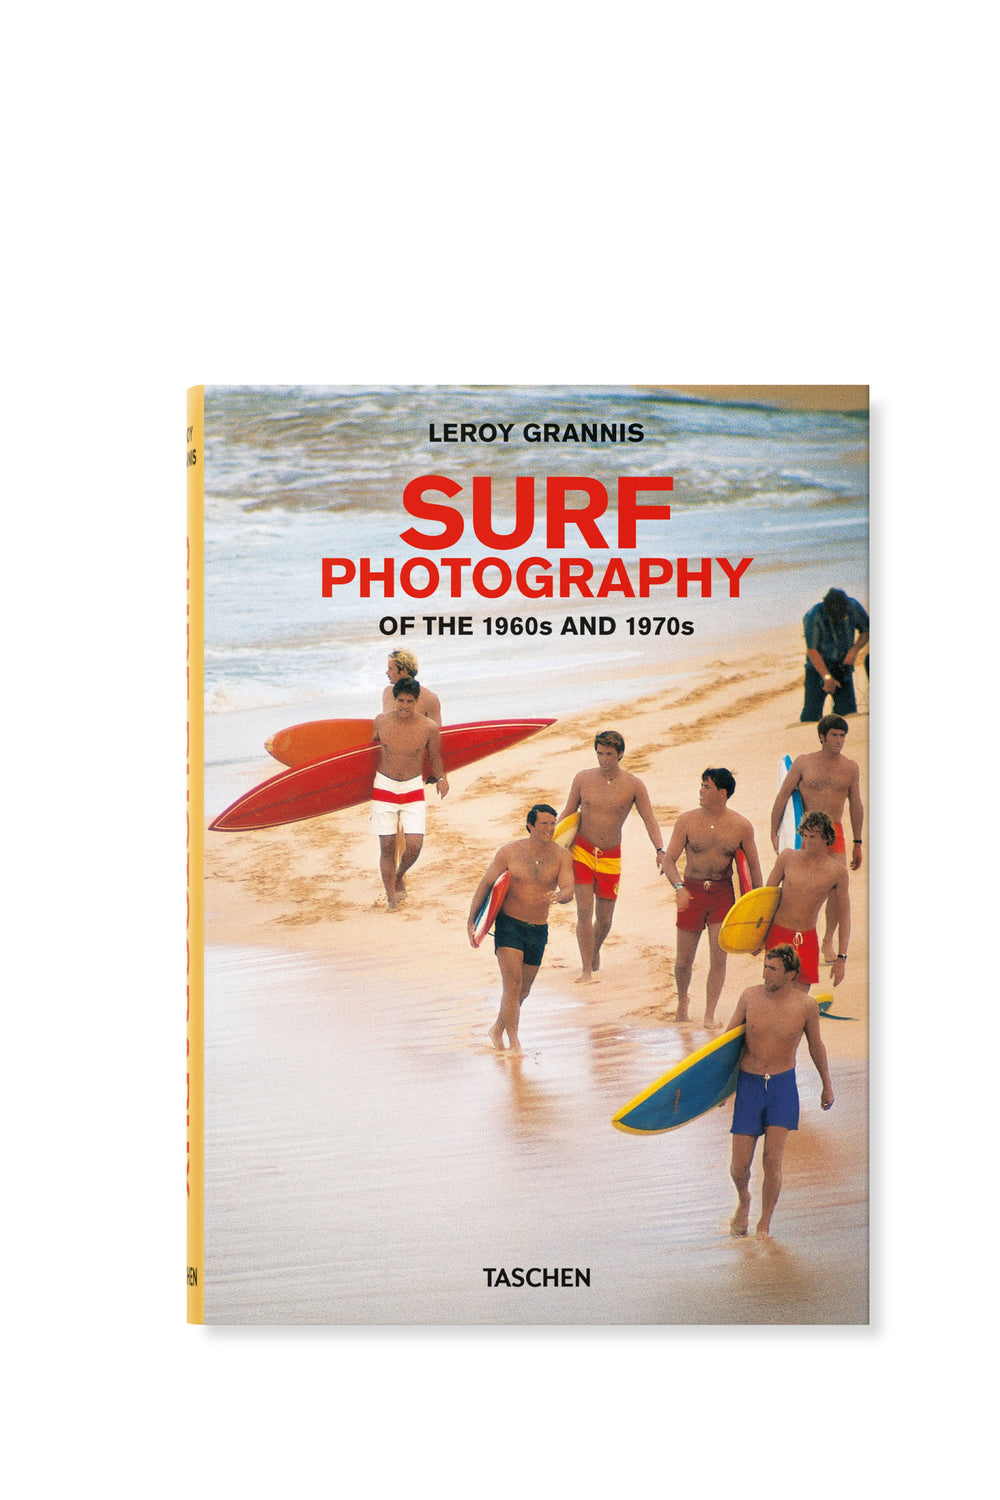 PUKAS-SURF-SHOP-BOOK-TASCHEN-SURF-PHOTOGRAPHY-OF-THE-1960s-AND-1970s